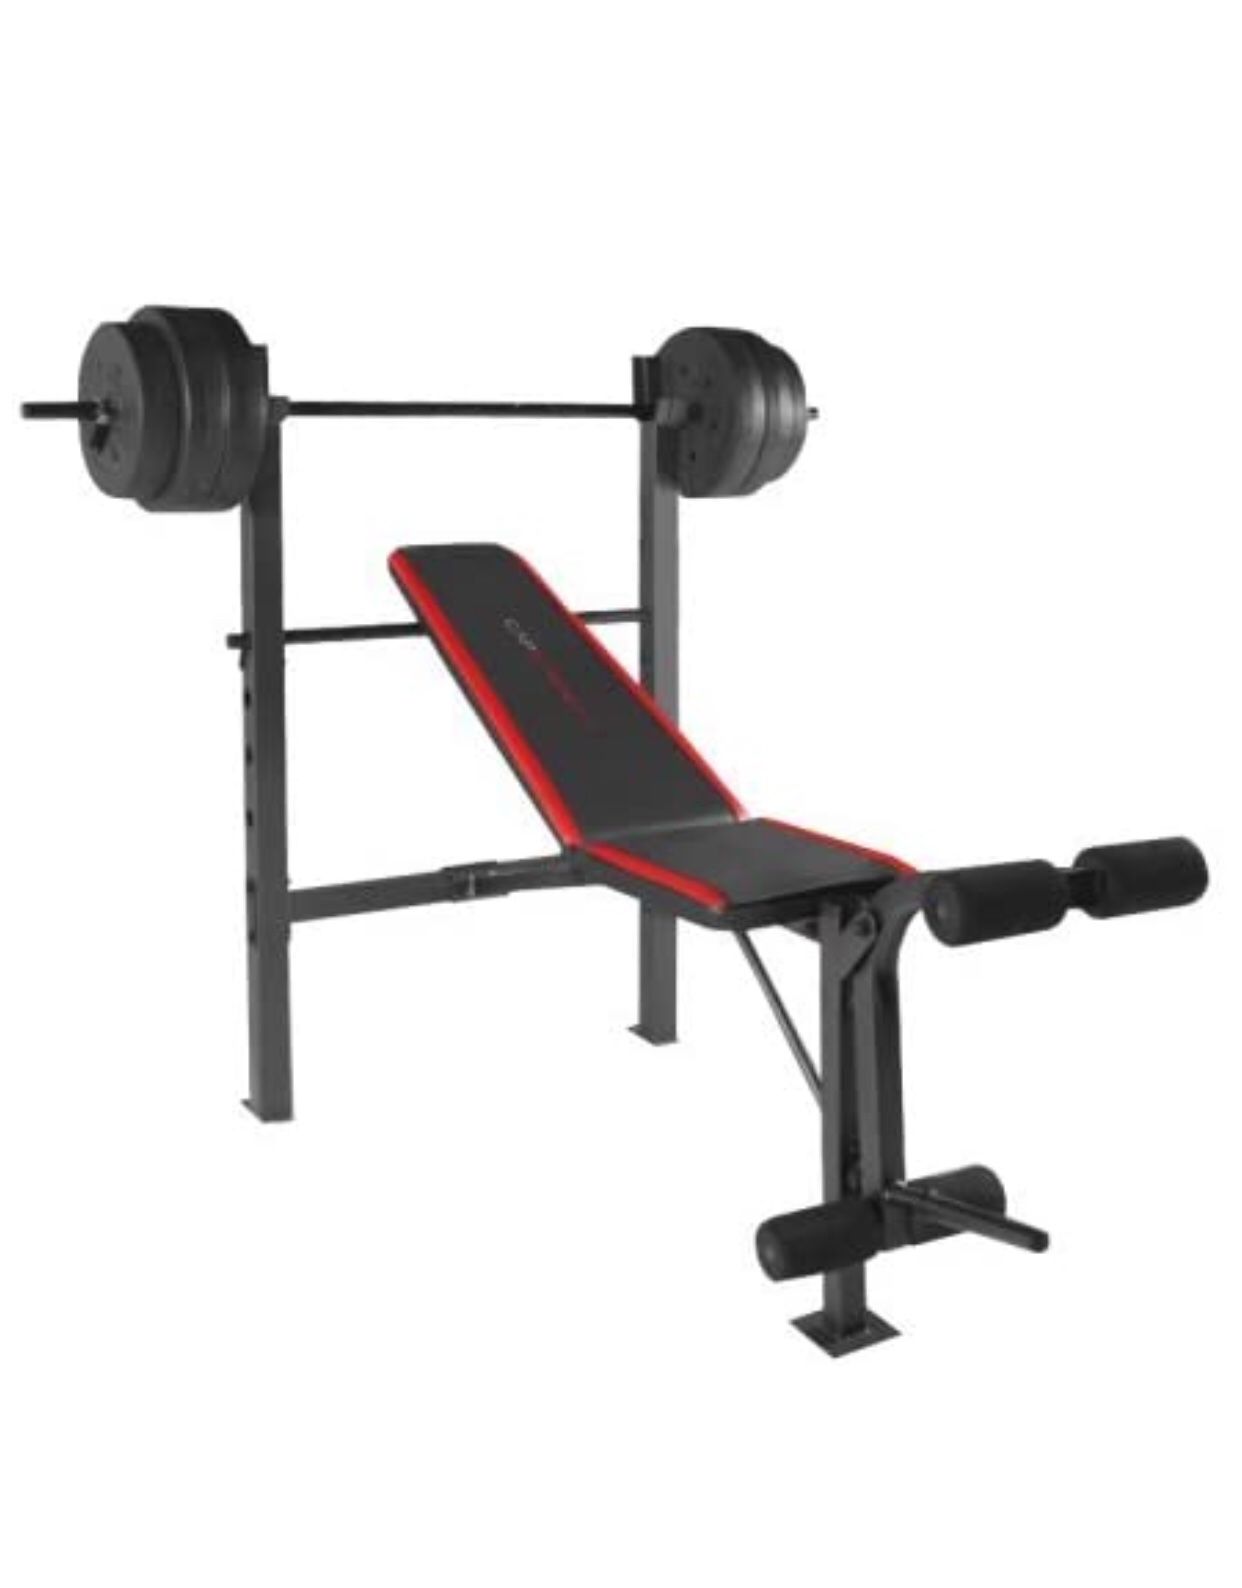 Marcy bench with 100 pounds weight